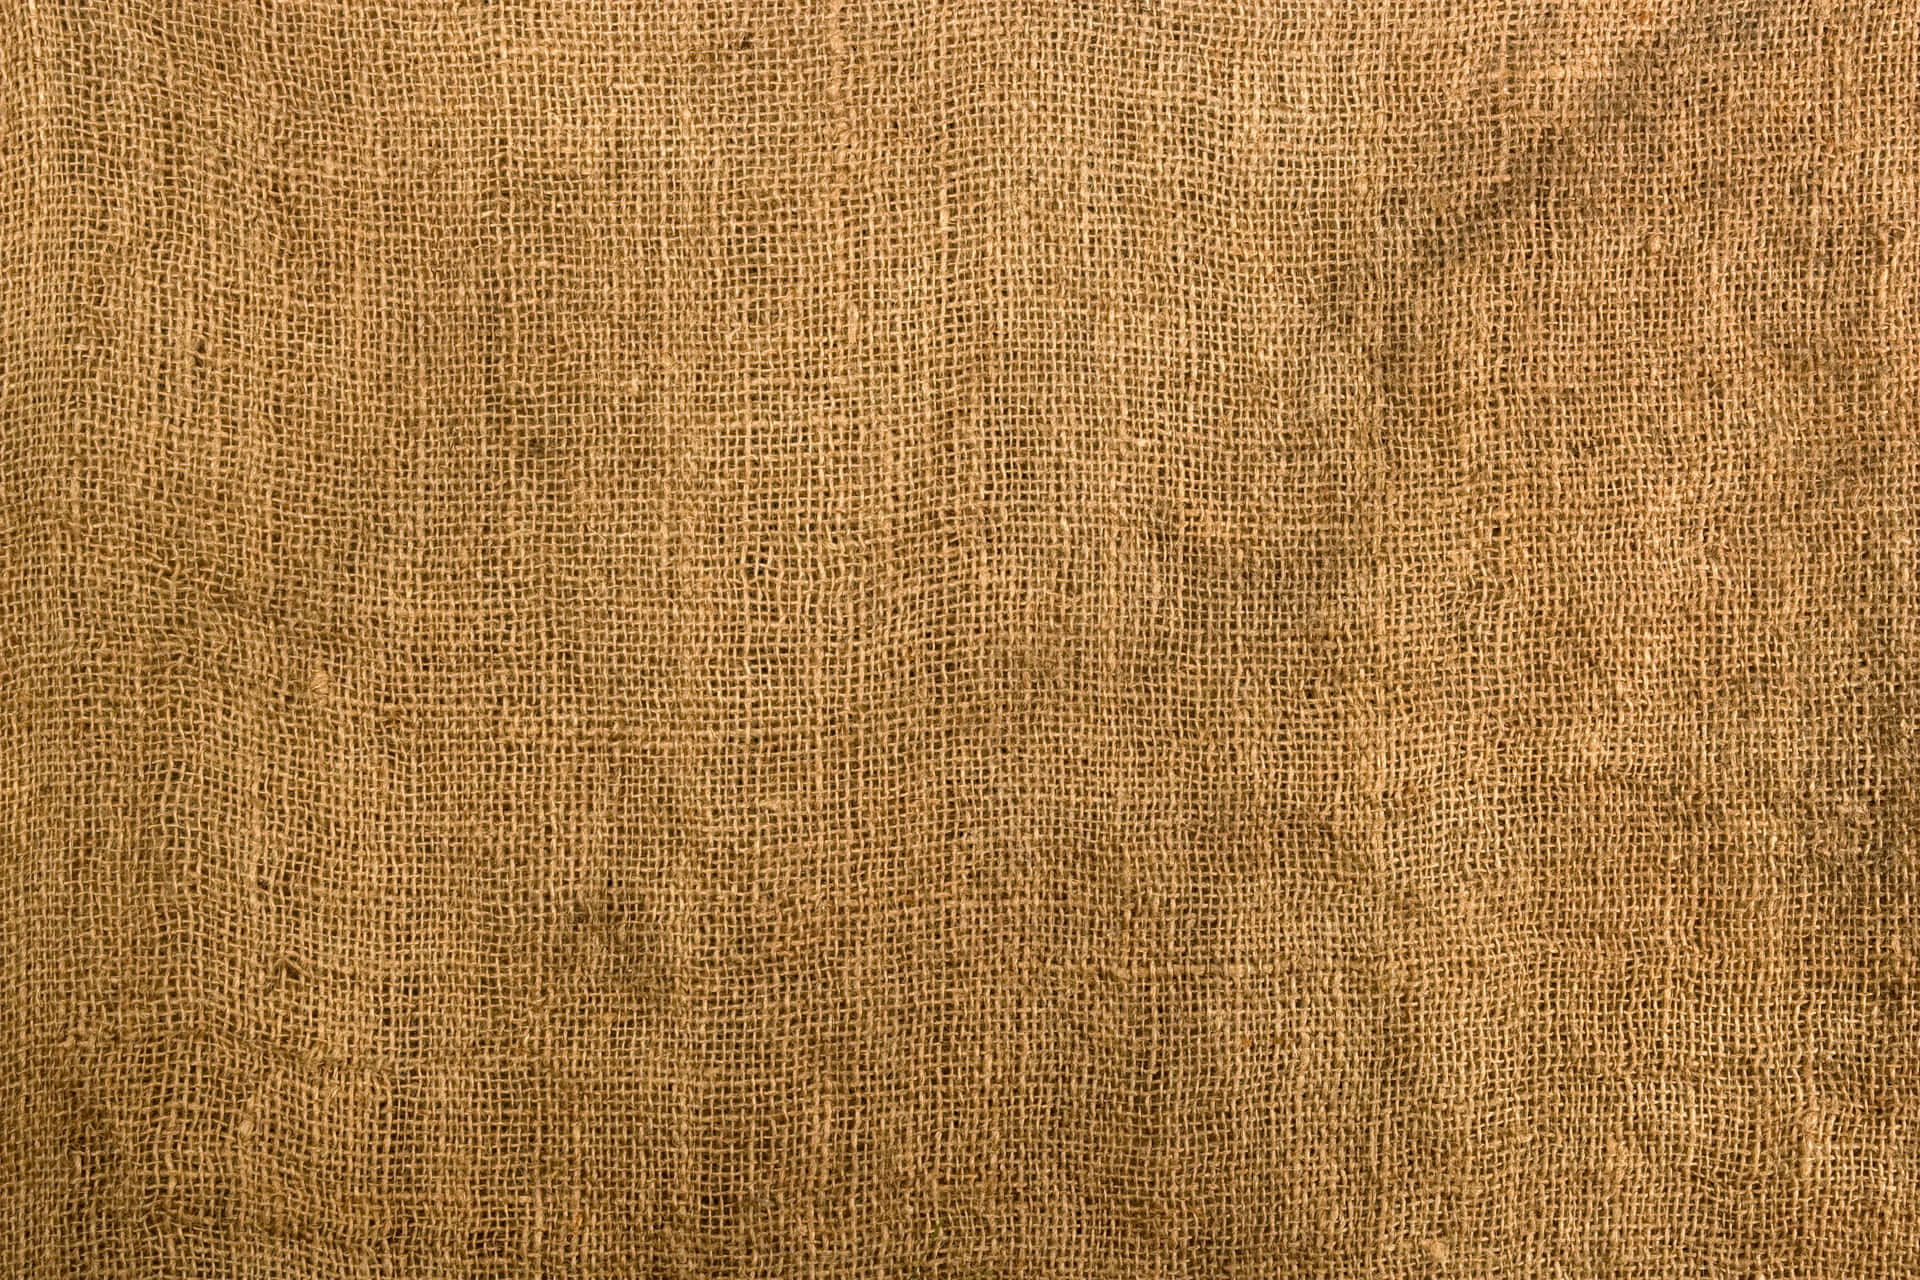 A Close Up Of A Brown Sack Cloth Background